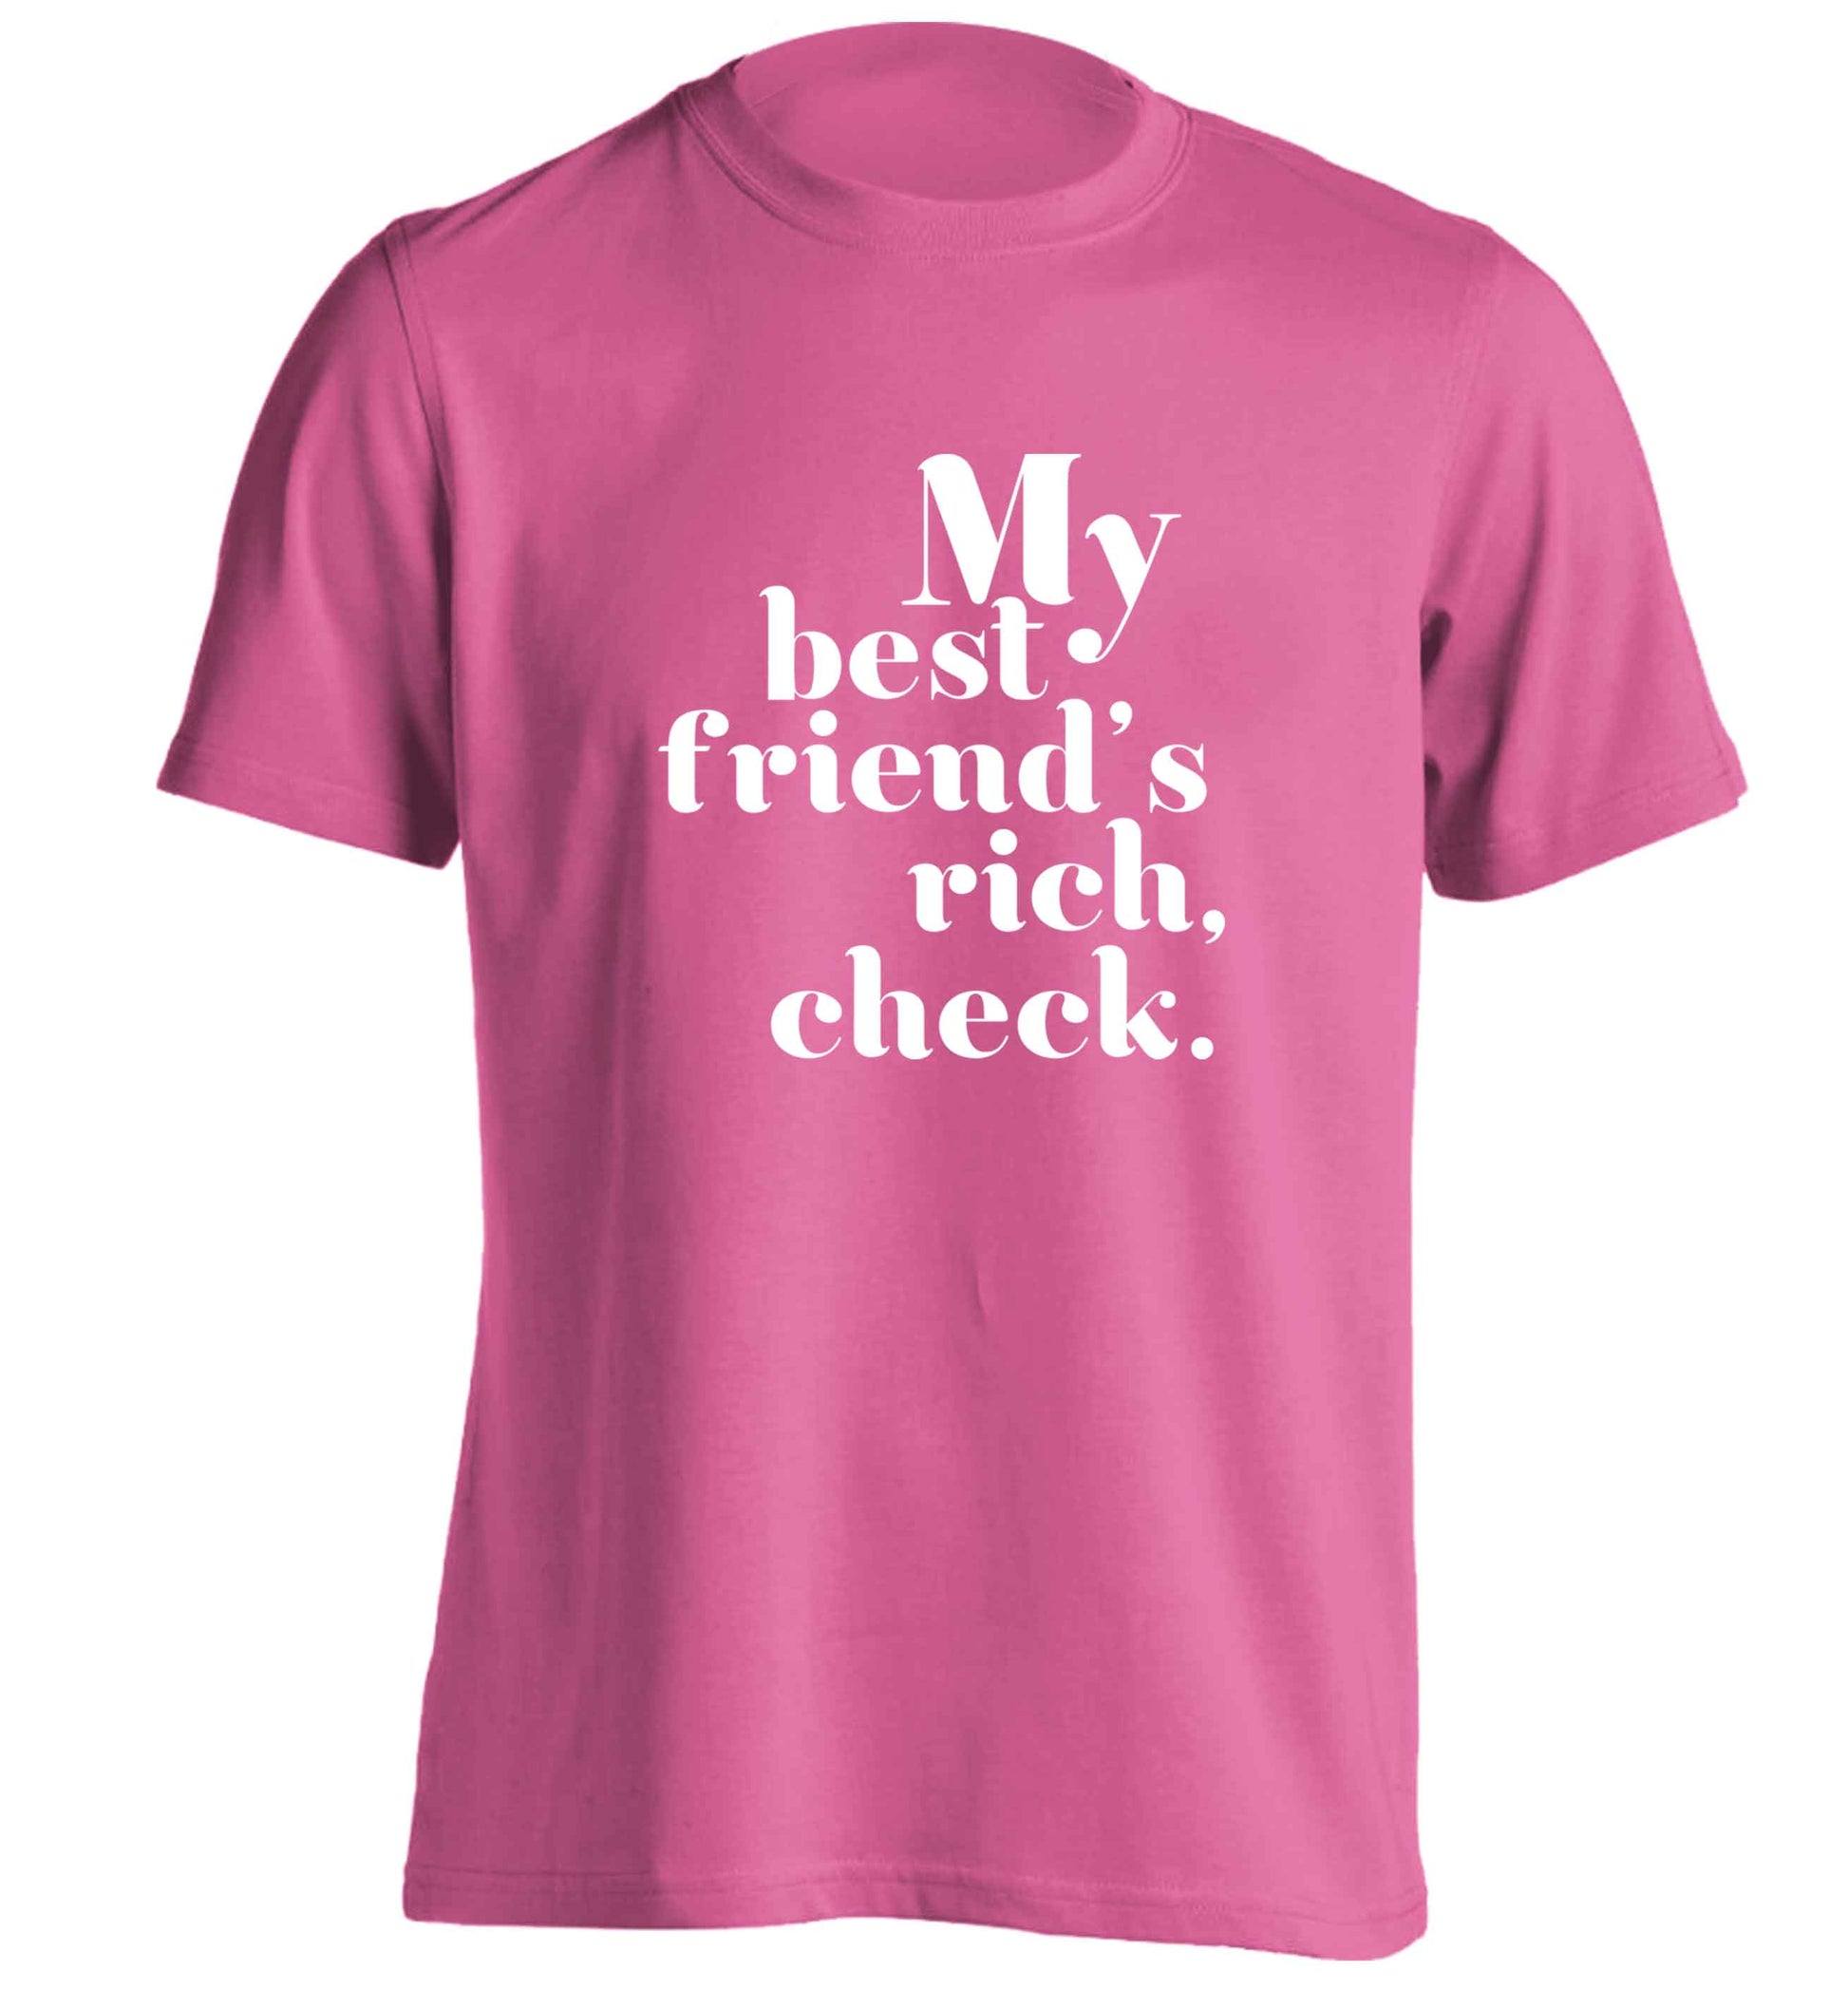 Got a rich best friend? Why not ask them to get you this, just let us  know and we'll tripple the price ;)  adults unisex pink Tshirt 2XL